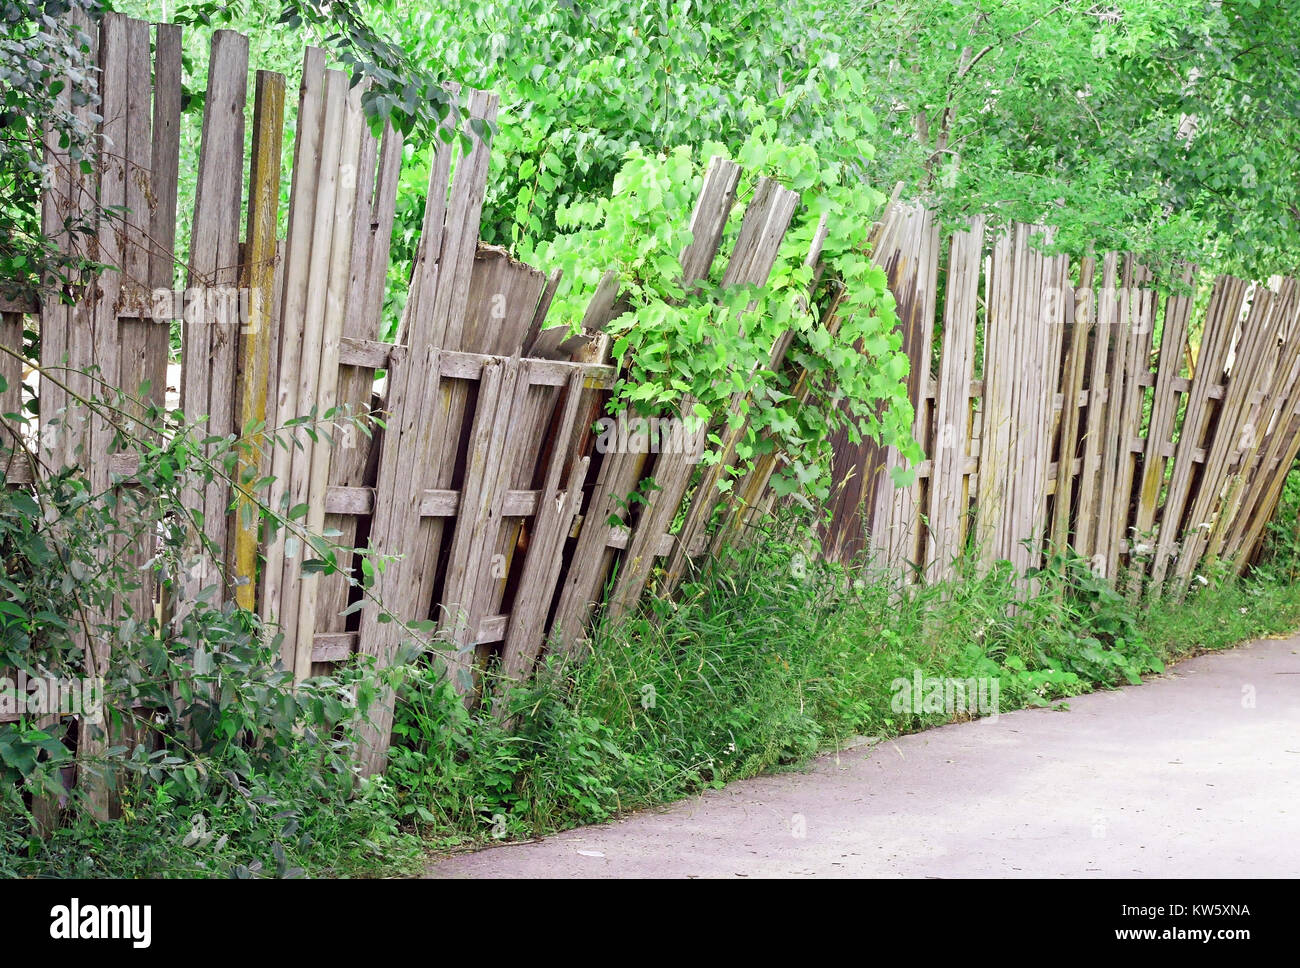 An old worn wooden fence falling over and in need of repair Stock Photo